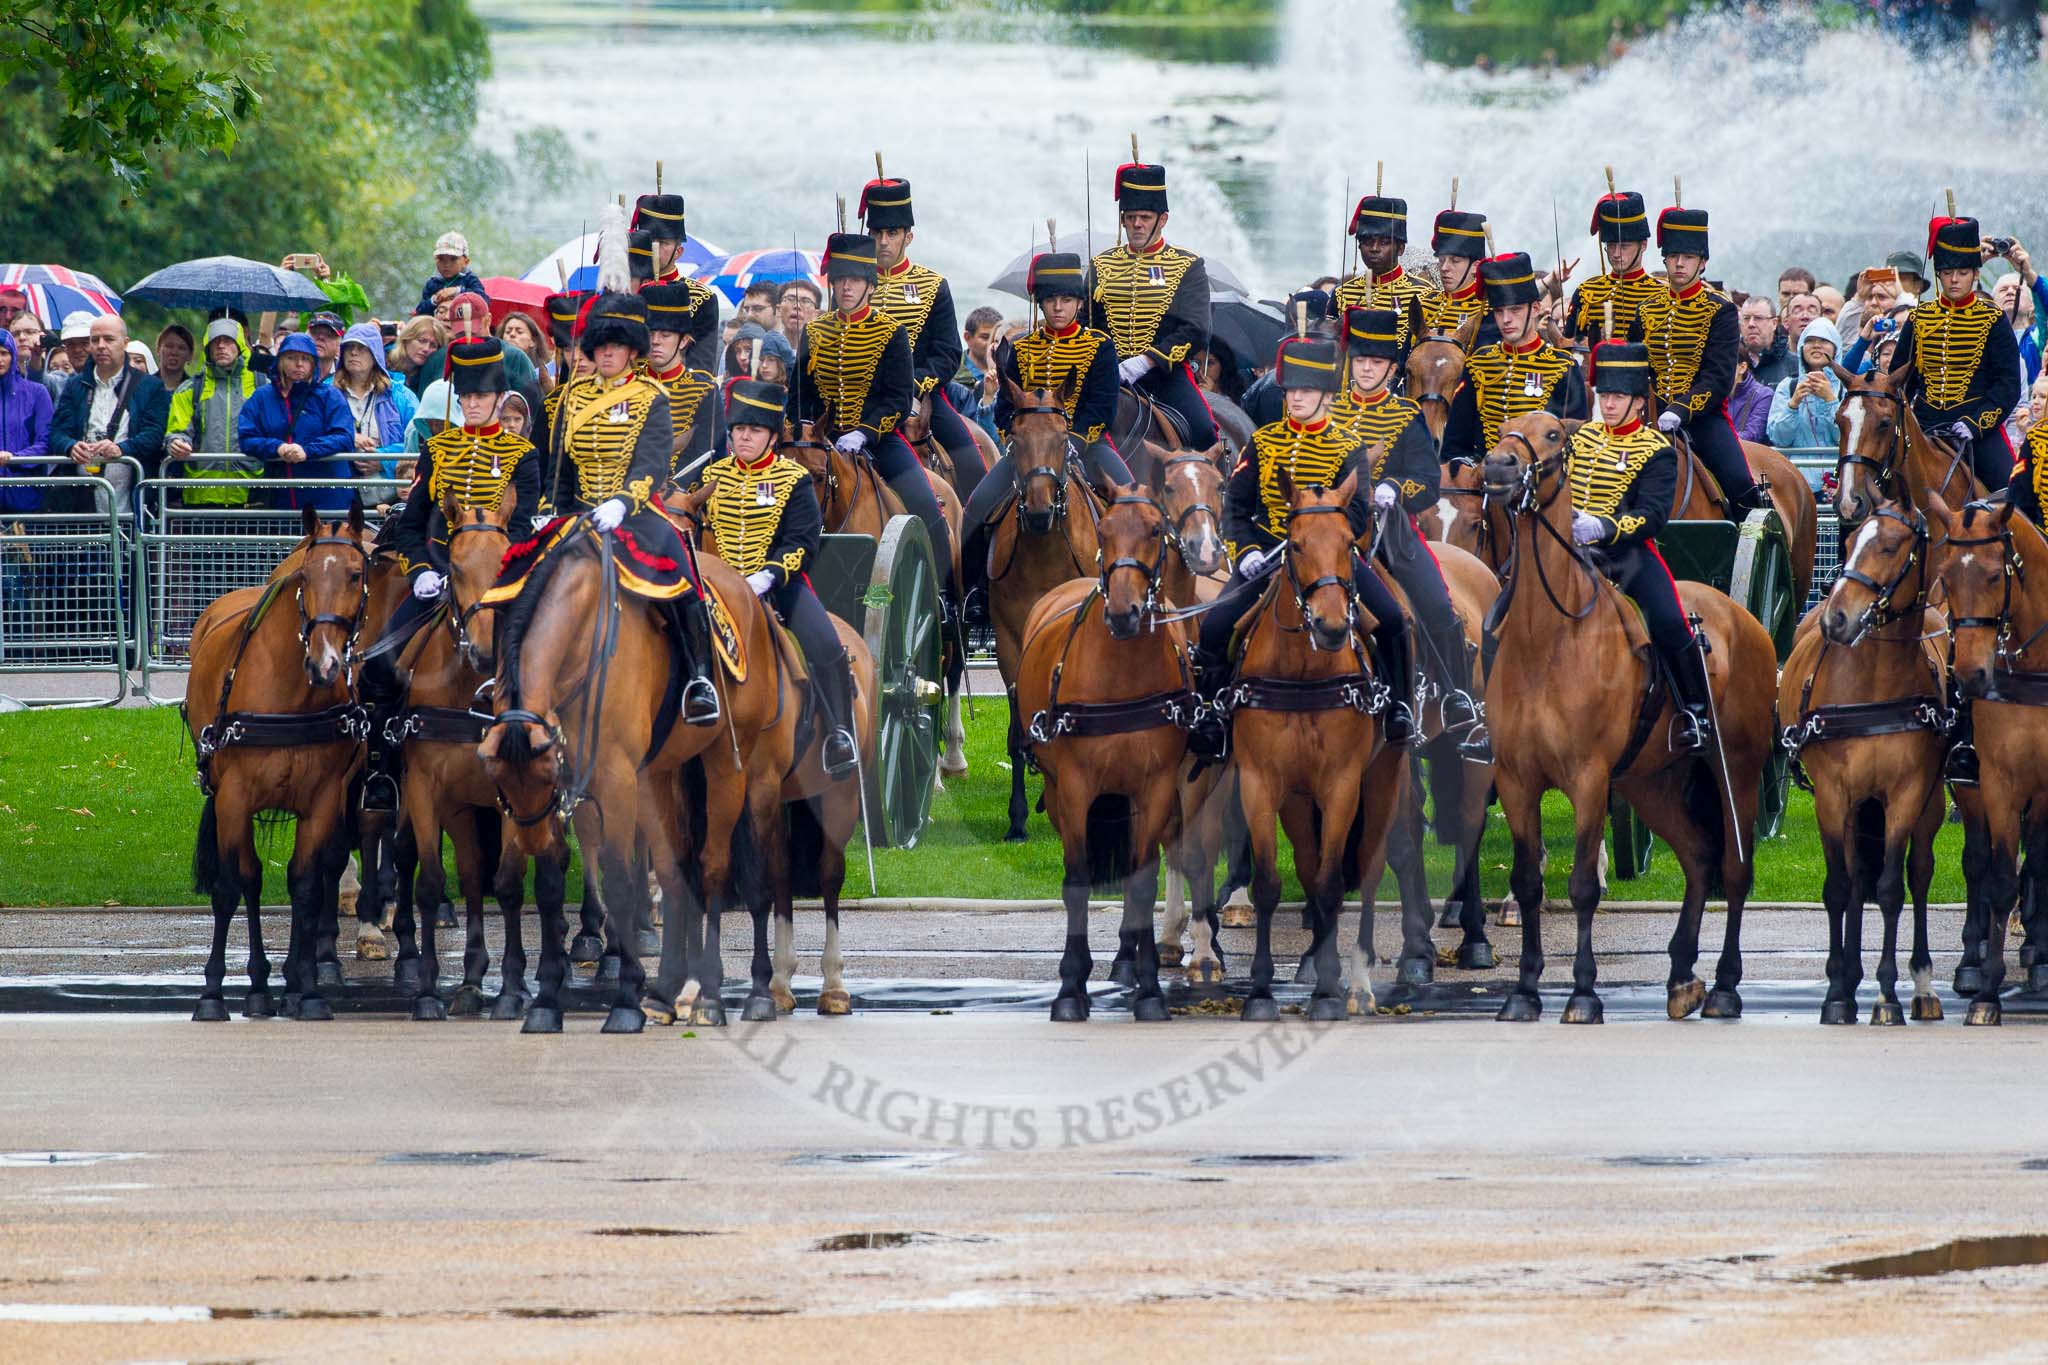 The Colonel's Review 2014.
Horse Guards Parade, Westminster,
London,

United Kingdom,
on 07 June 2014 at 11:24, image #439